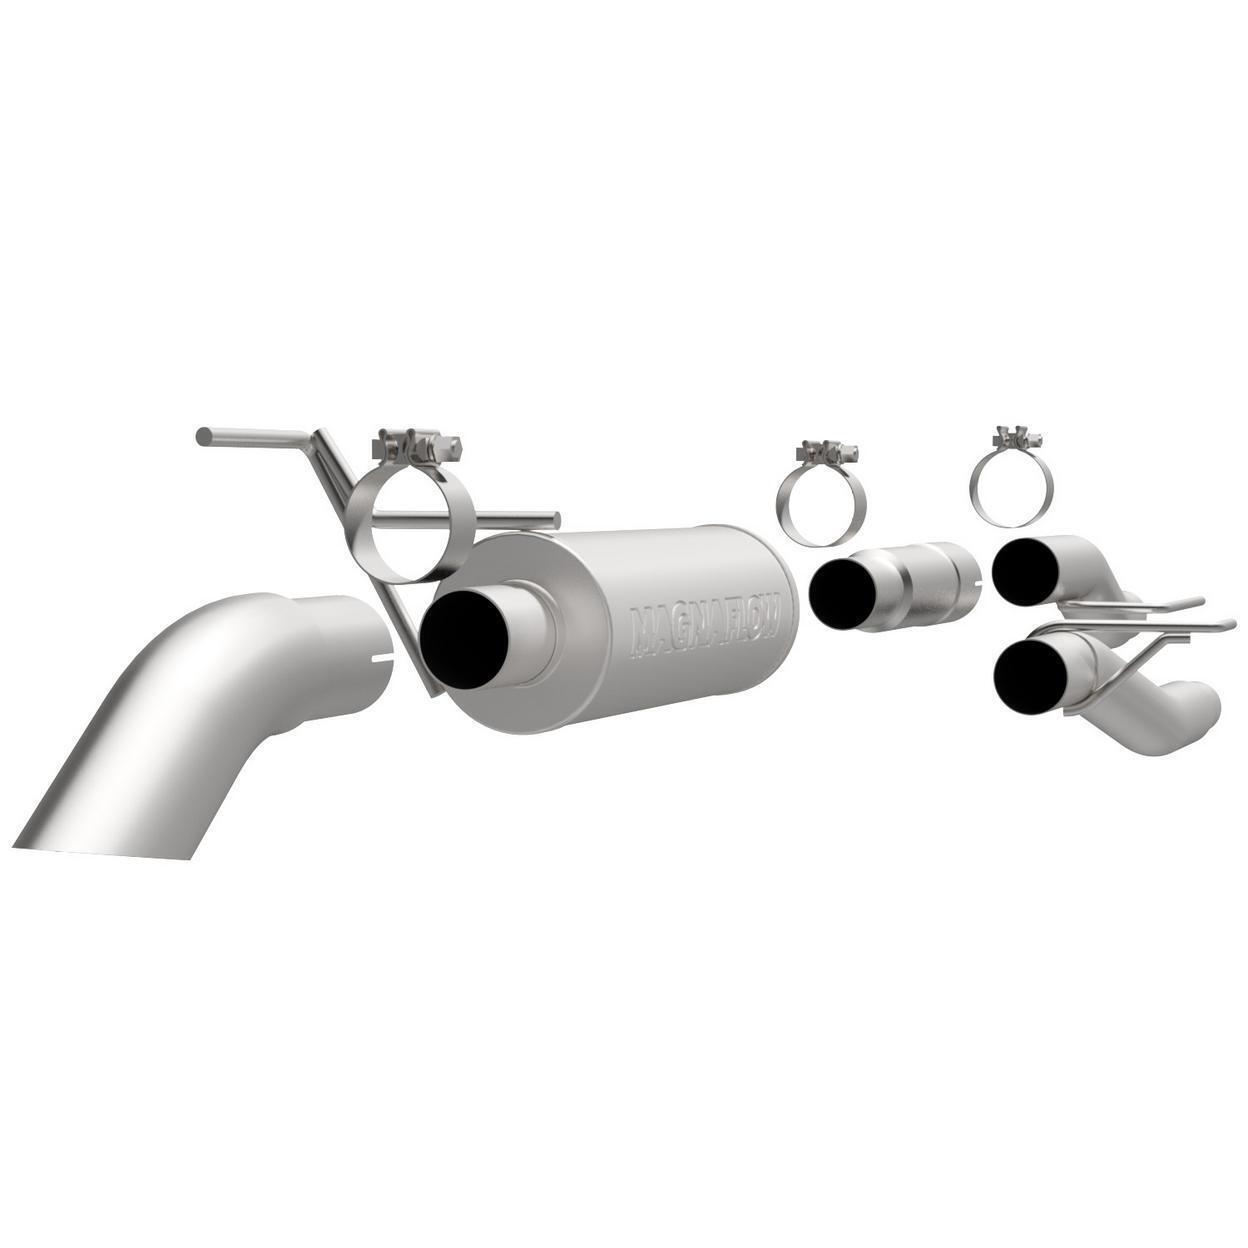 Exhaust System Kit for 2004 Ford F-150 Extended Cab Pickup